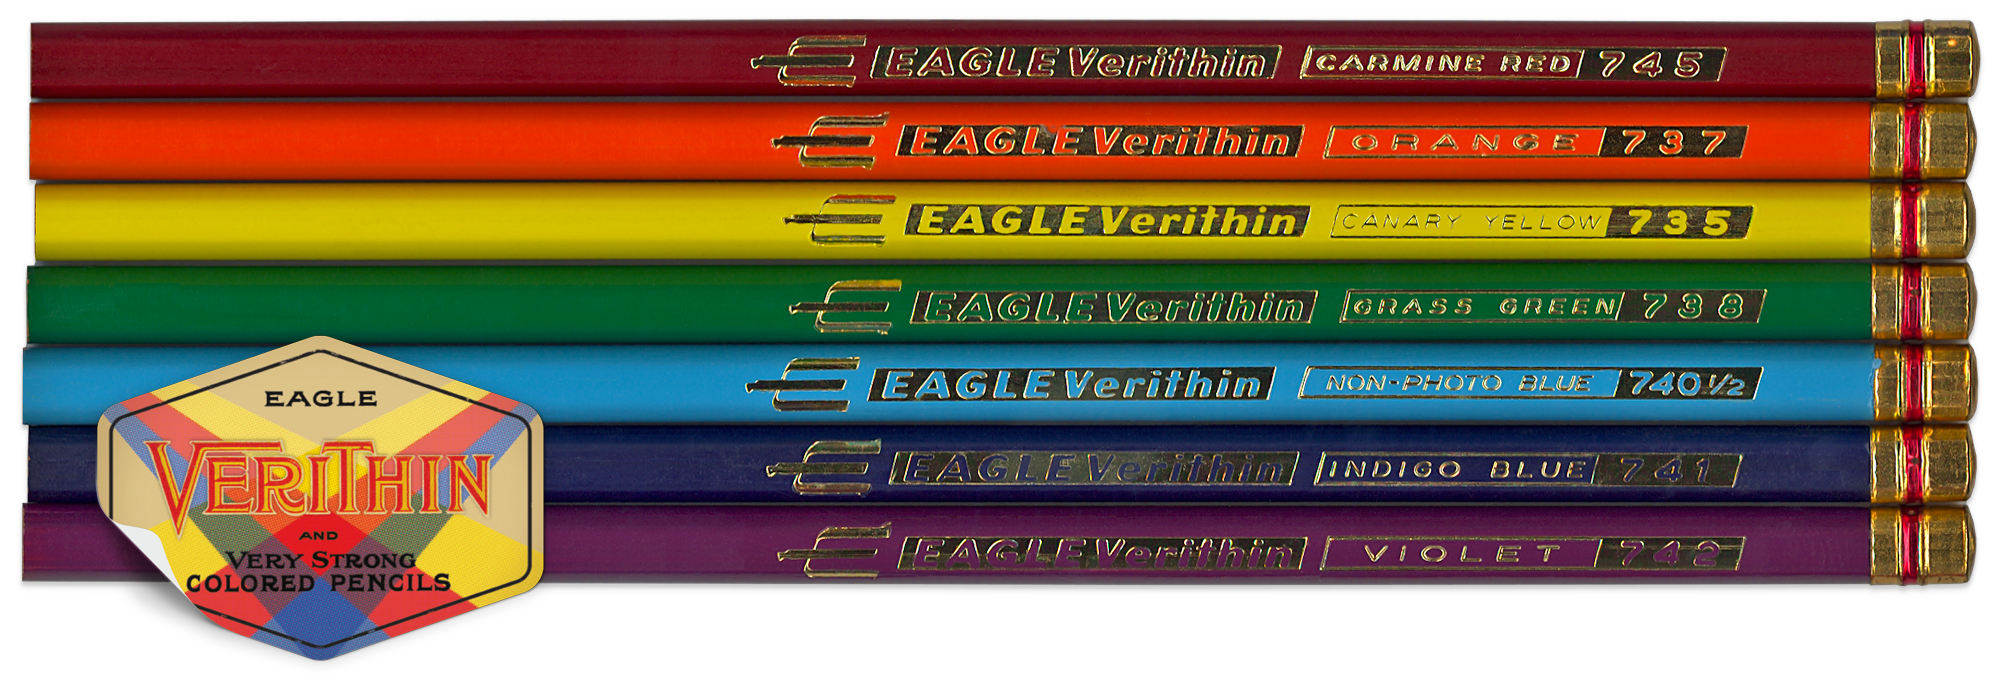 Eagle Verithin Art Set 796 Colored Pencils With Case Sharpened